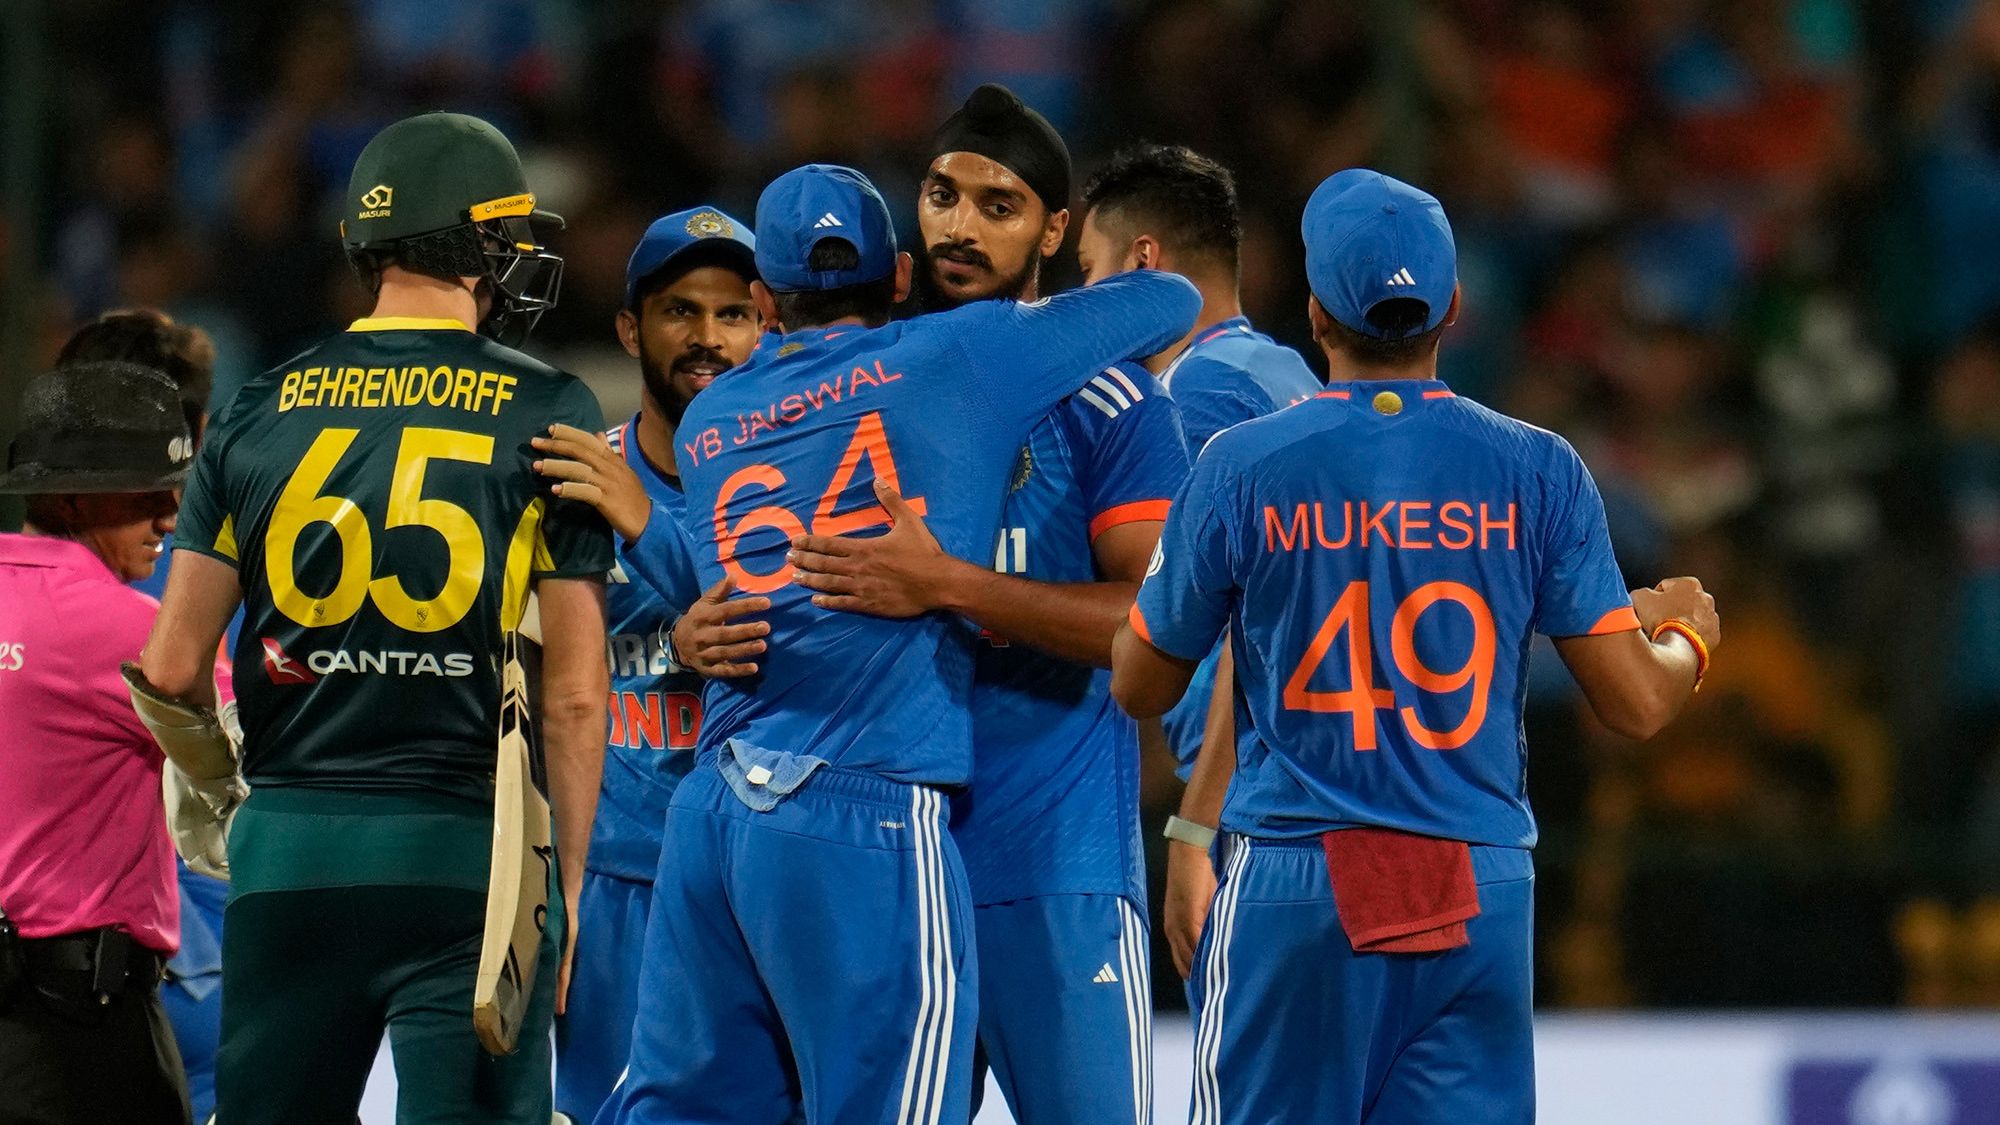 'Disappointing' Aussies lose Twenty20 series convincingly as India reap World Cup revenge